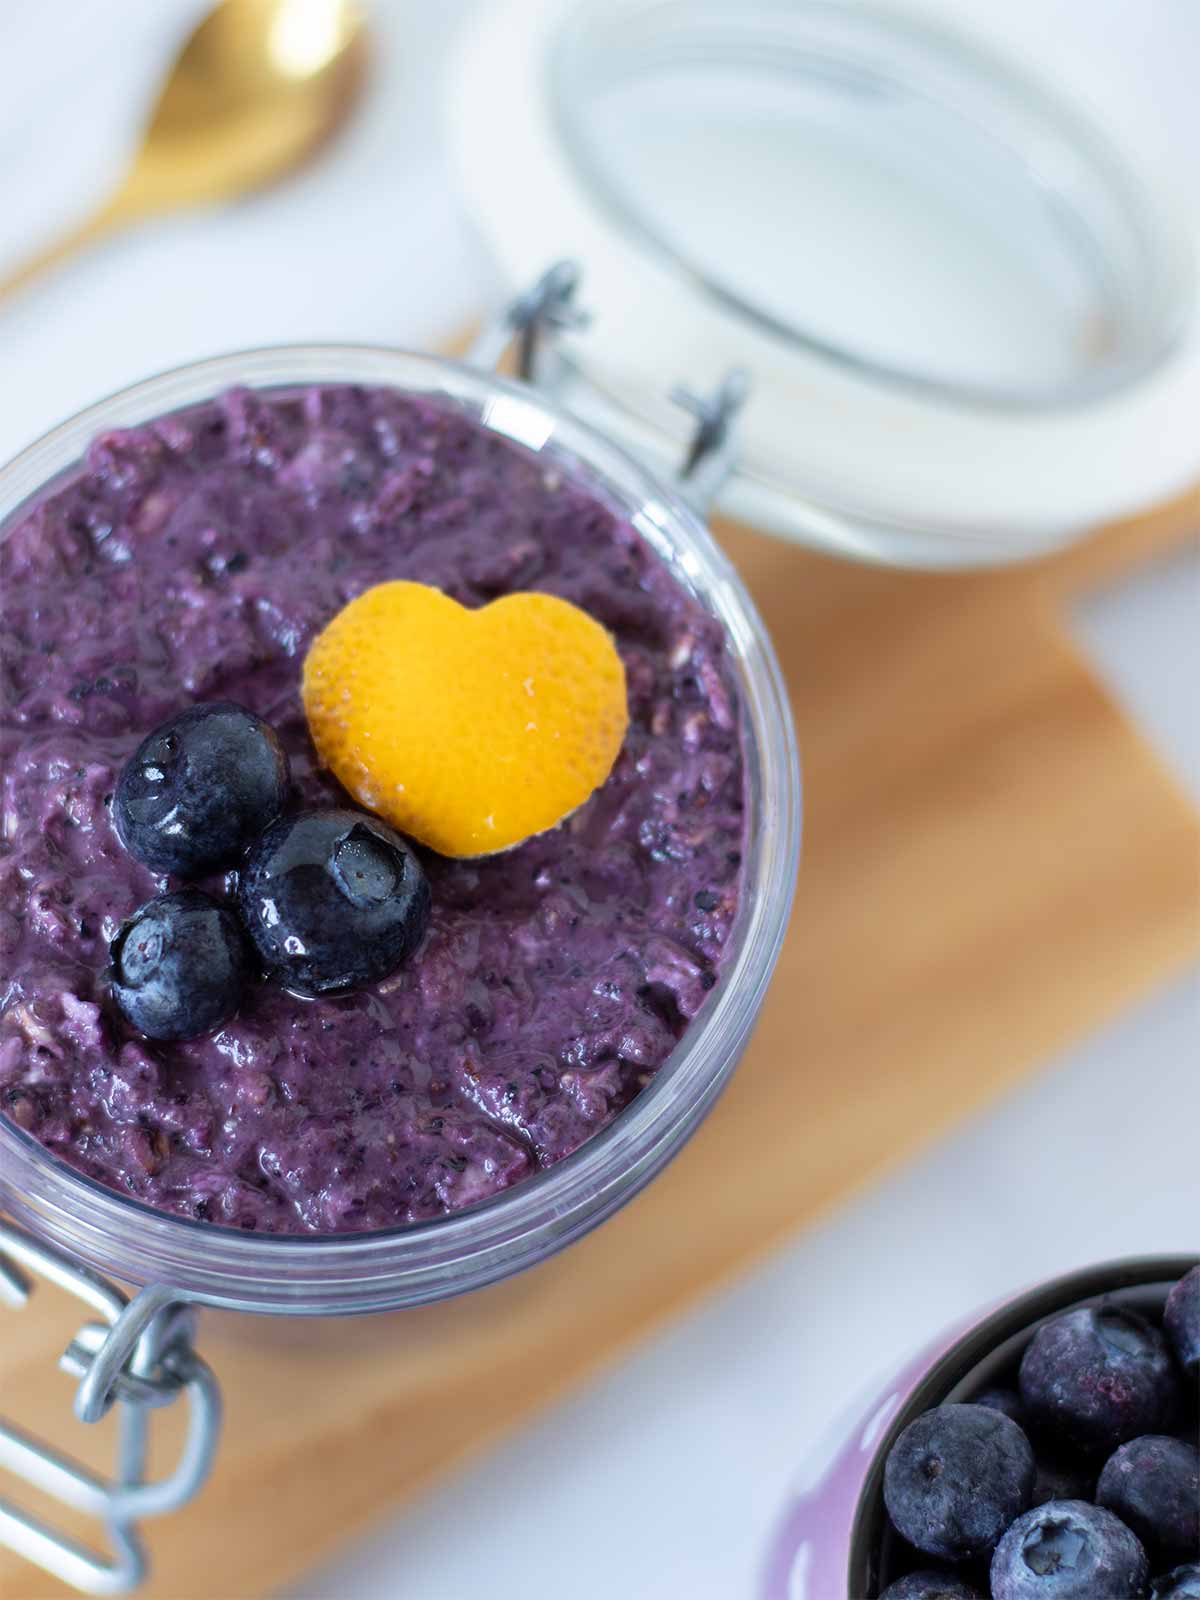 Healthy blueberry overnight oats in a jar decorated with carved lemon peel heart